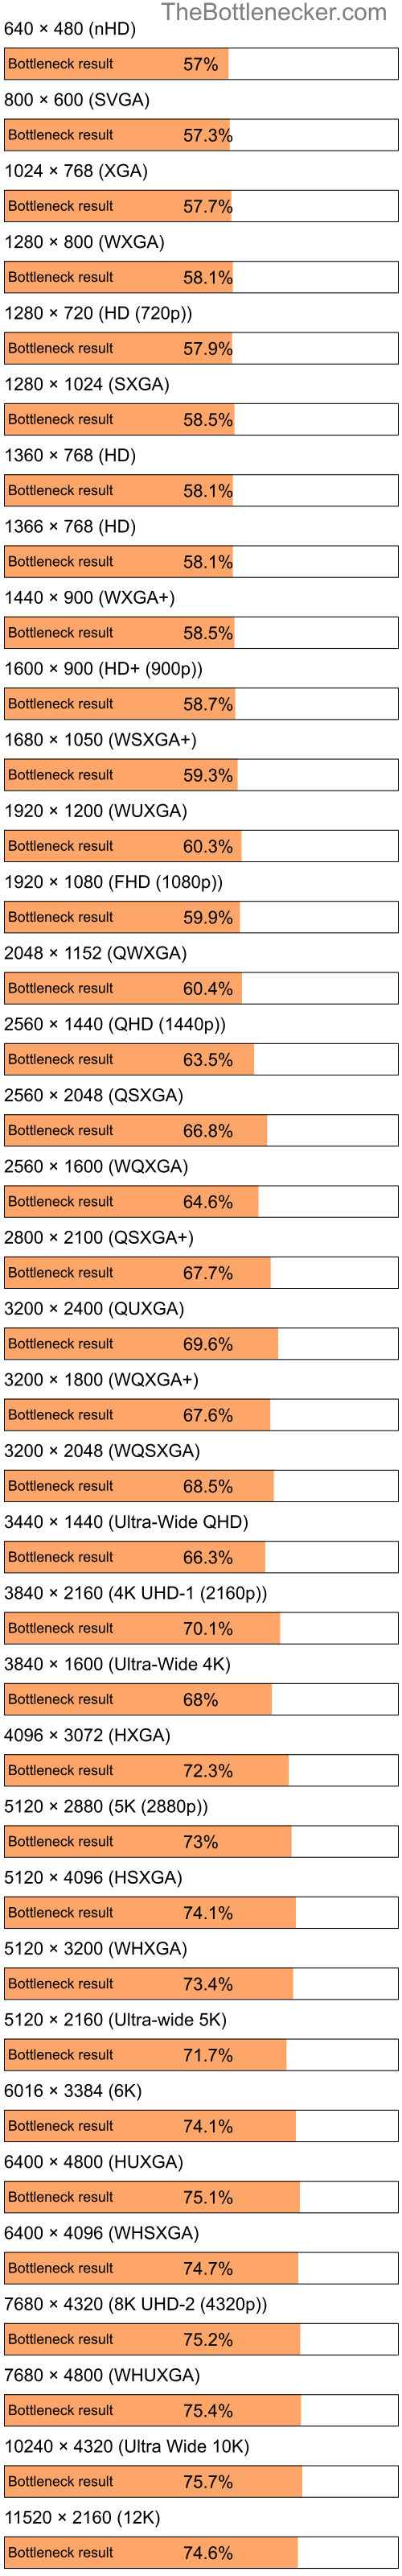 Bottleneck results by resolution for Intel Atom N280 and AMD Mobility Radeon HD 2400 in Processor Intense Tasks